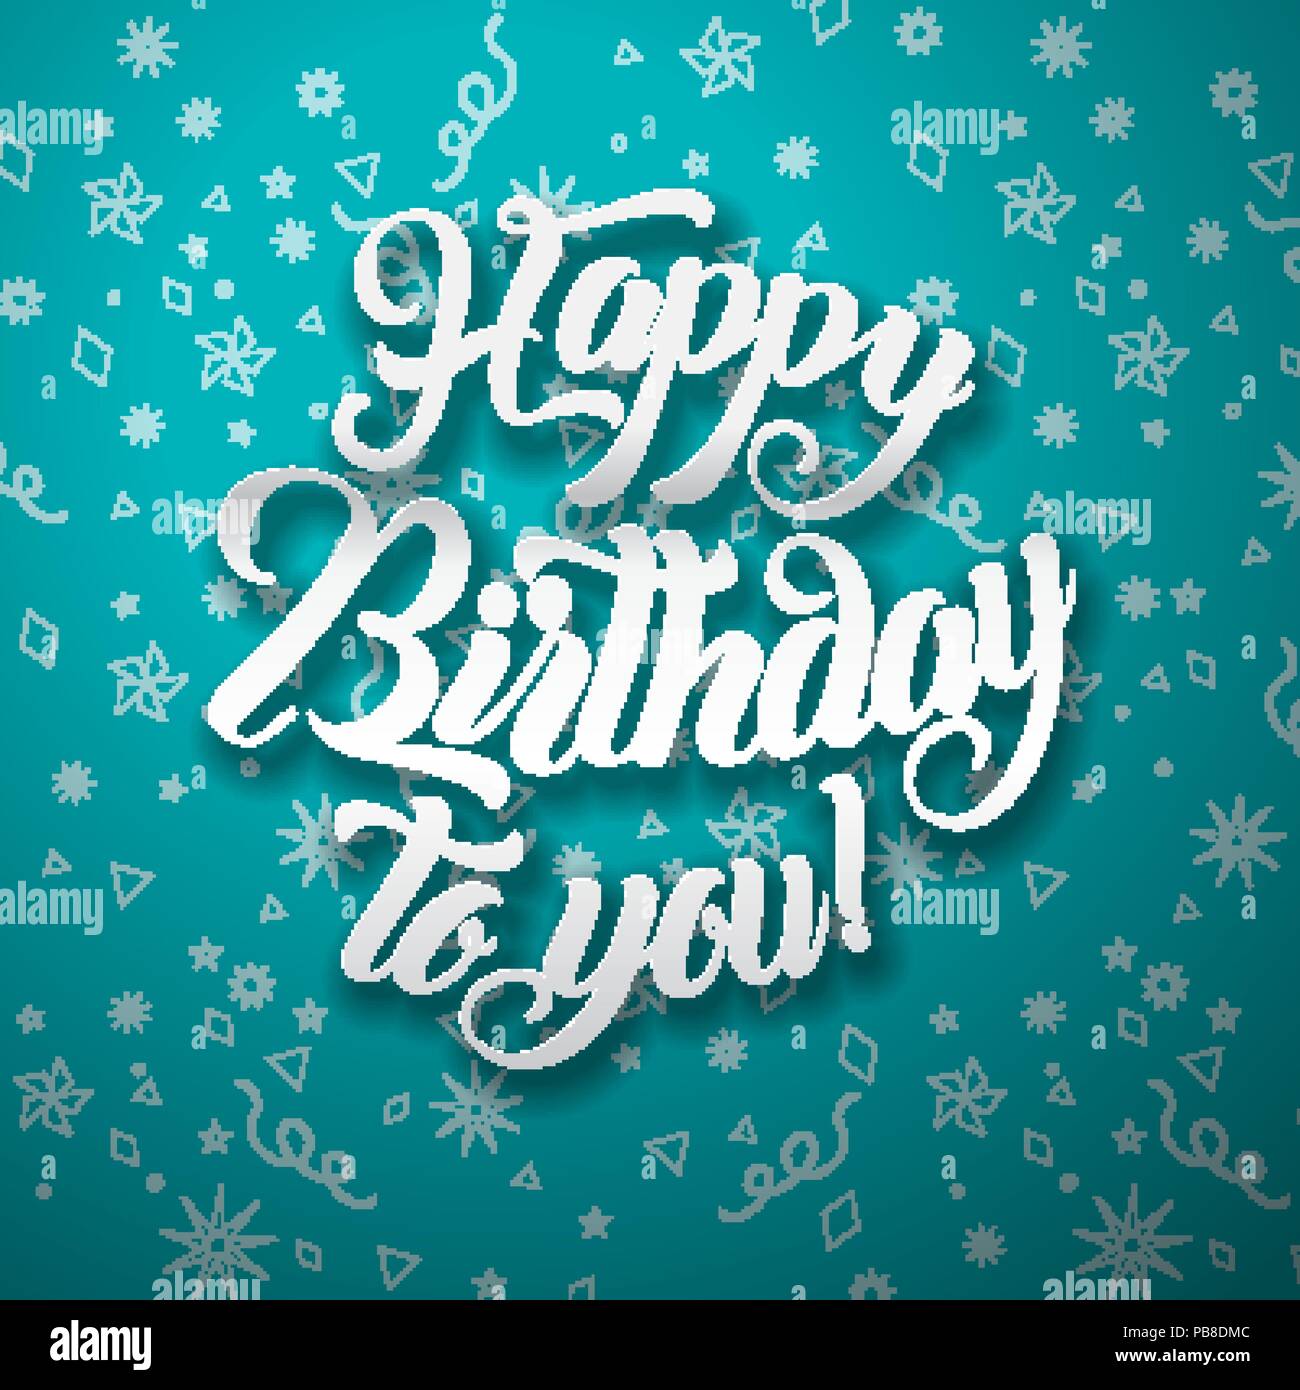 Happy birthday to you lettering text vector illustration Birthday greeting card design Stock